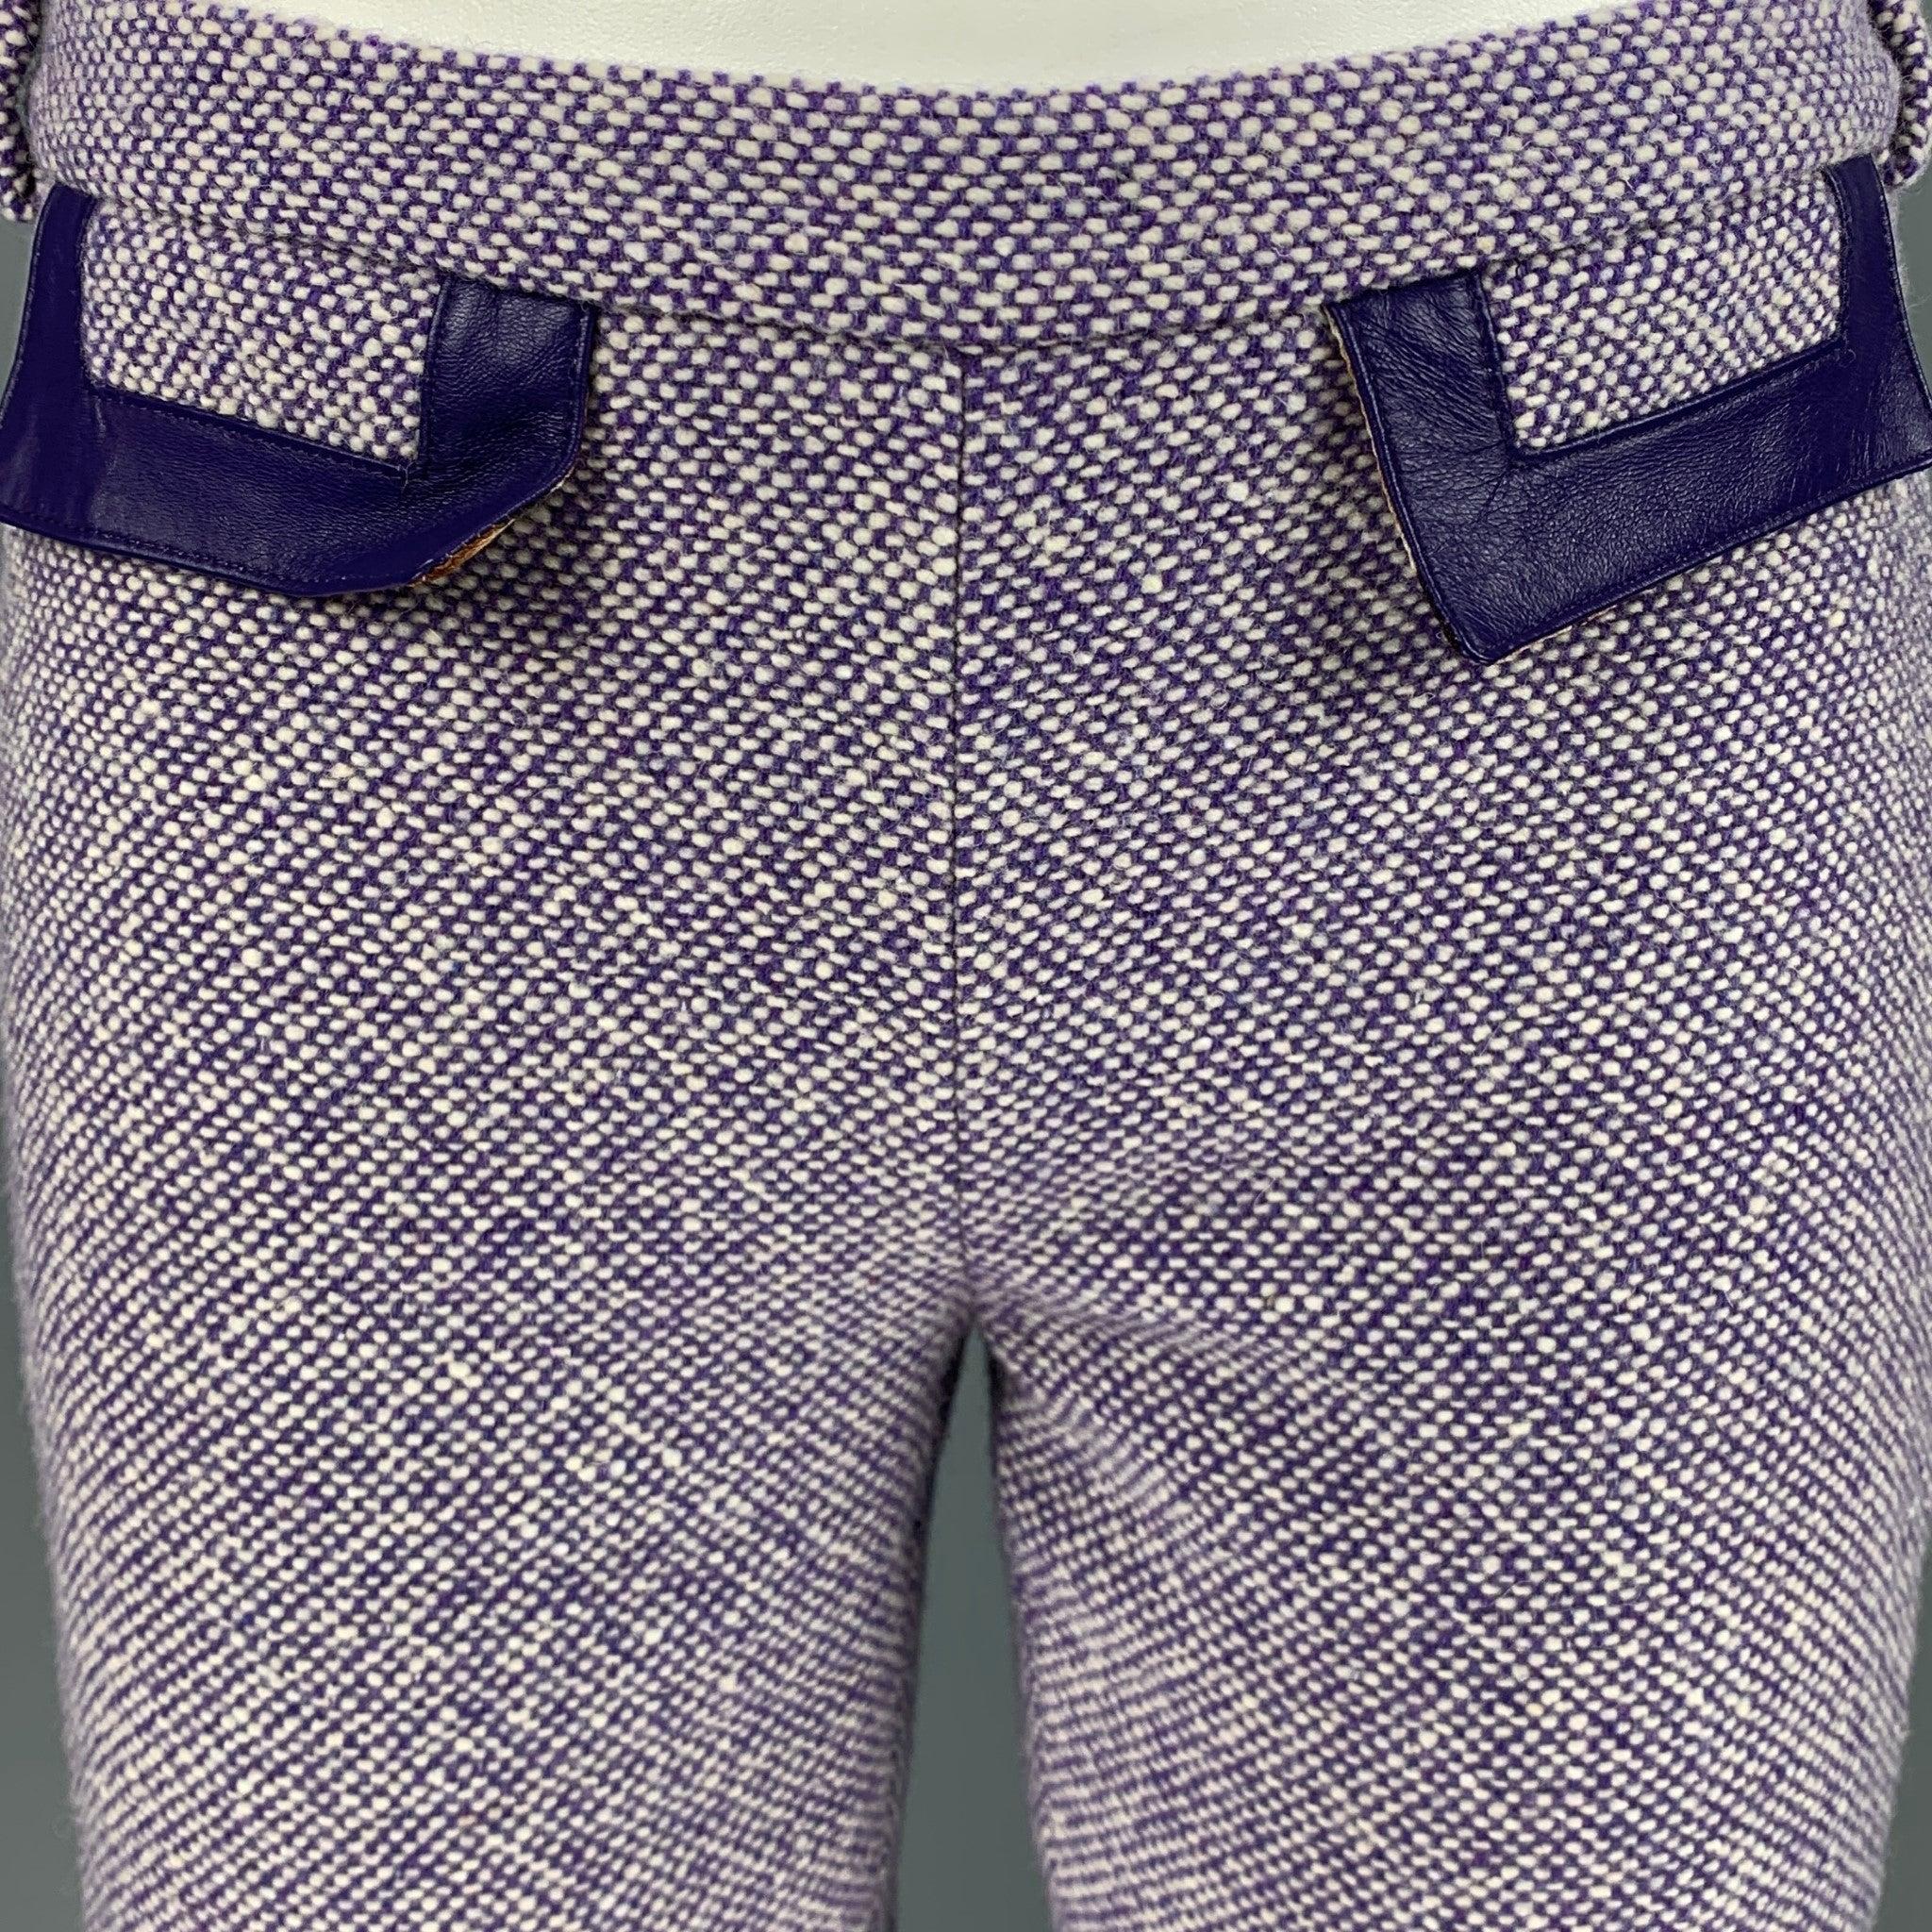 DOLCE & GABBANA Size 26 Purple White Wool Blend Dress Pants In Good Condition For Sale In San Francisco, CA